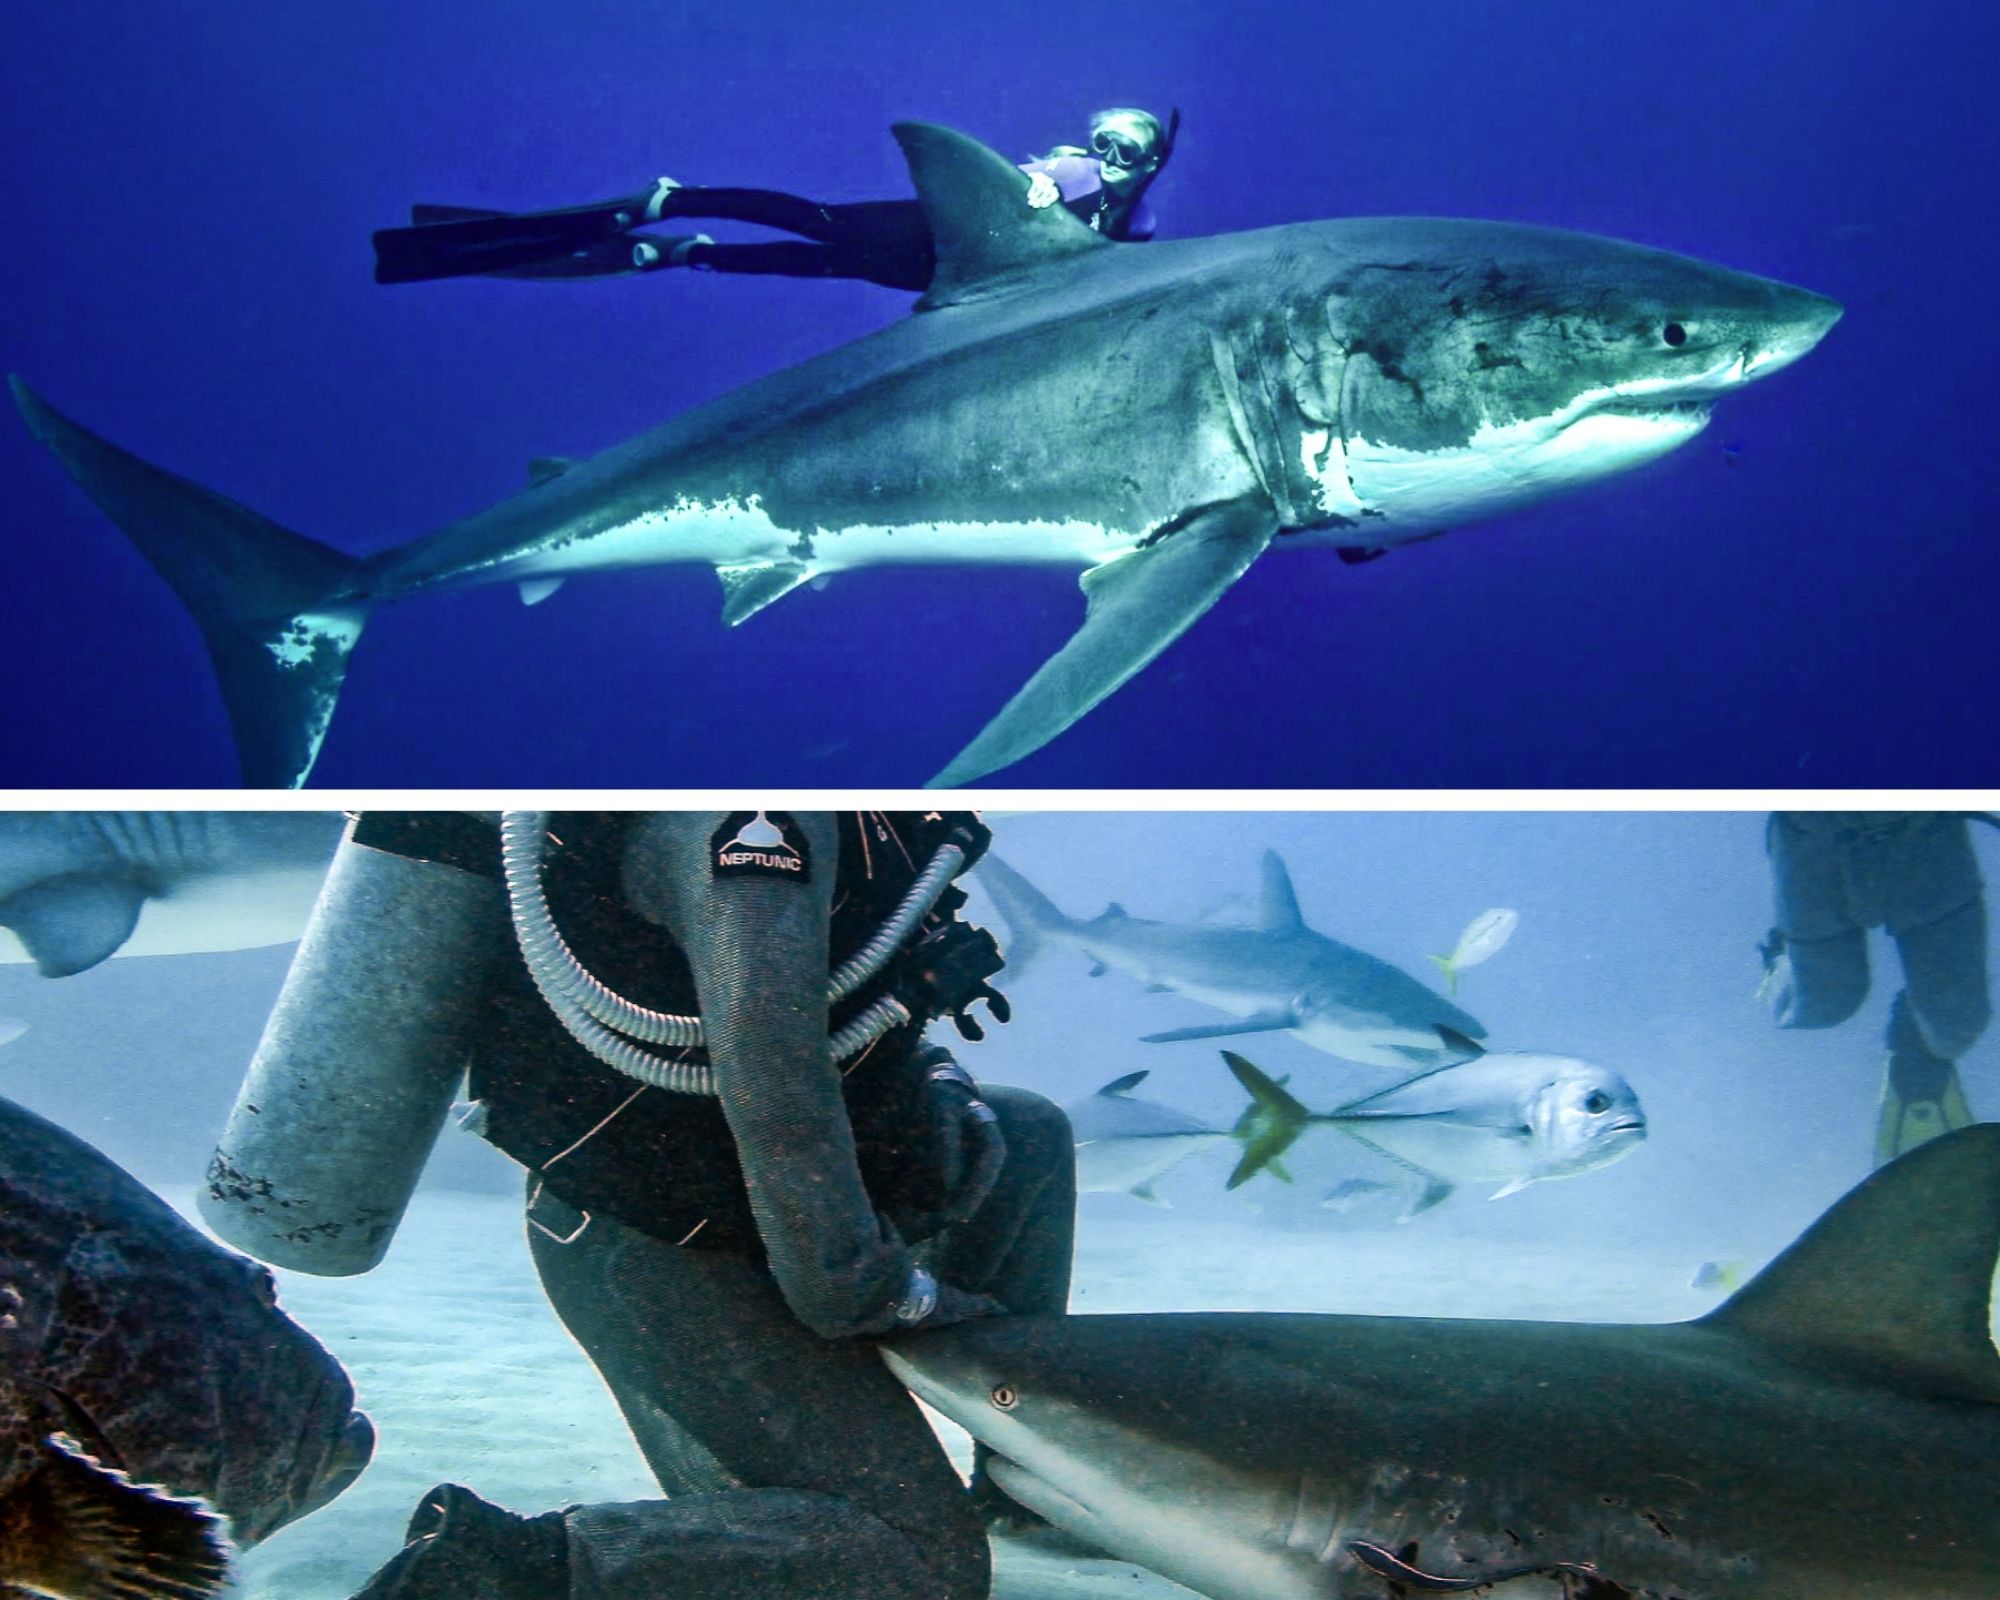 The top photo is of Ocean Ramsey ss she swims along with Bella, a huge great white shark with whom she has a long-term relationship. The bottom image shows Cristina Zenato as she gives a Caribbean reef shark love and affection, who keeps coming back for more.